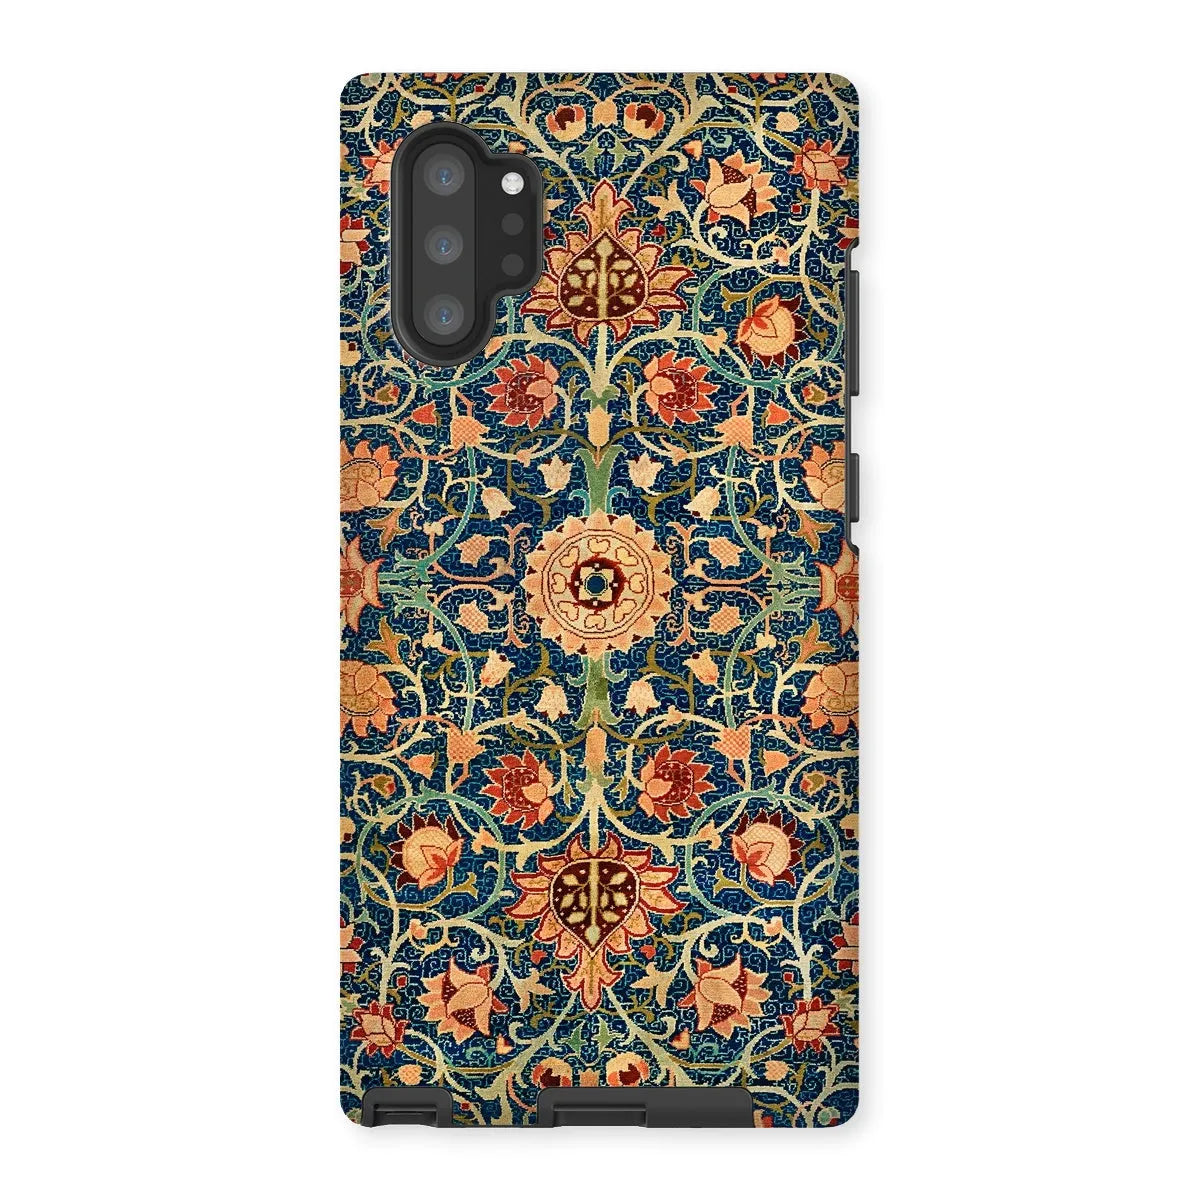 Holland Park - Aesthetic Pattern Phone Case - William Morris - Samsung Galaxy Note 10p / Matte - Mobile Phone Cases